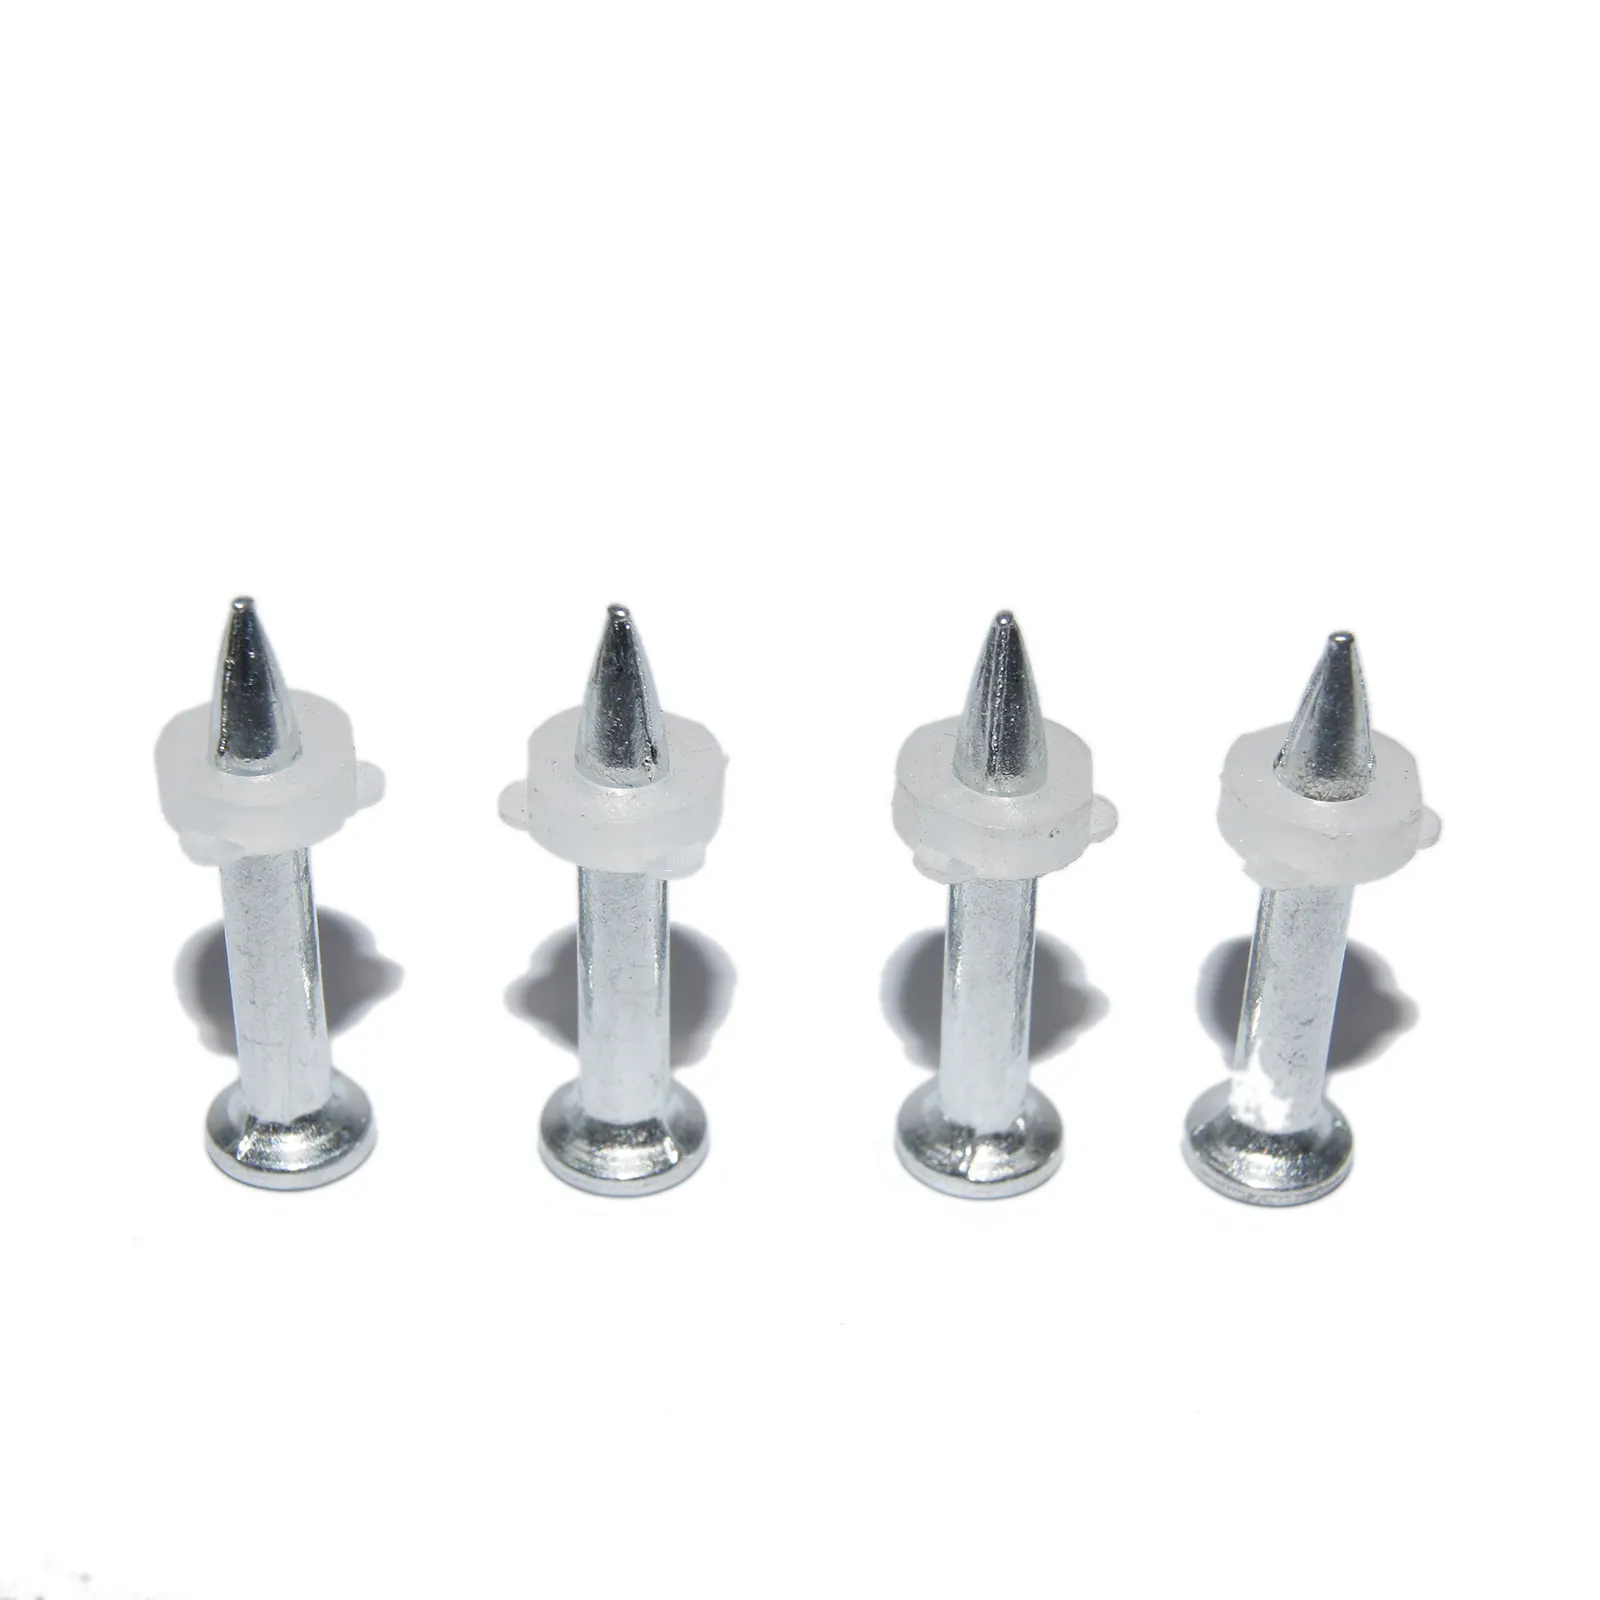 High Quality Yd Concrete Nail Screw Nail With Plastic Washer For Construction Brick Stone Drive Pin